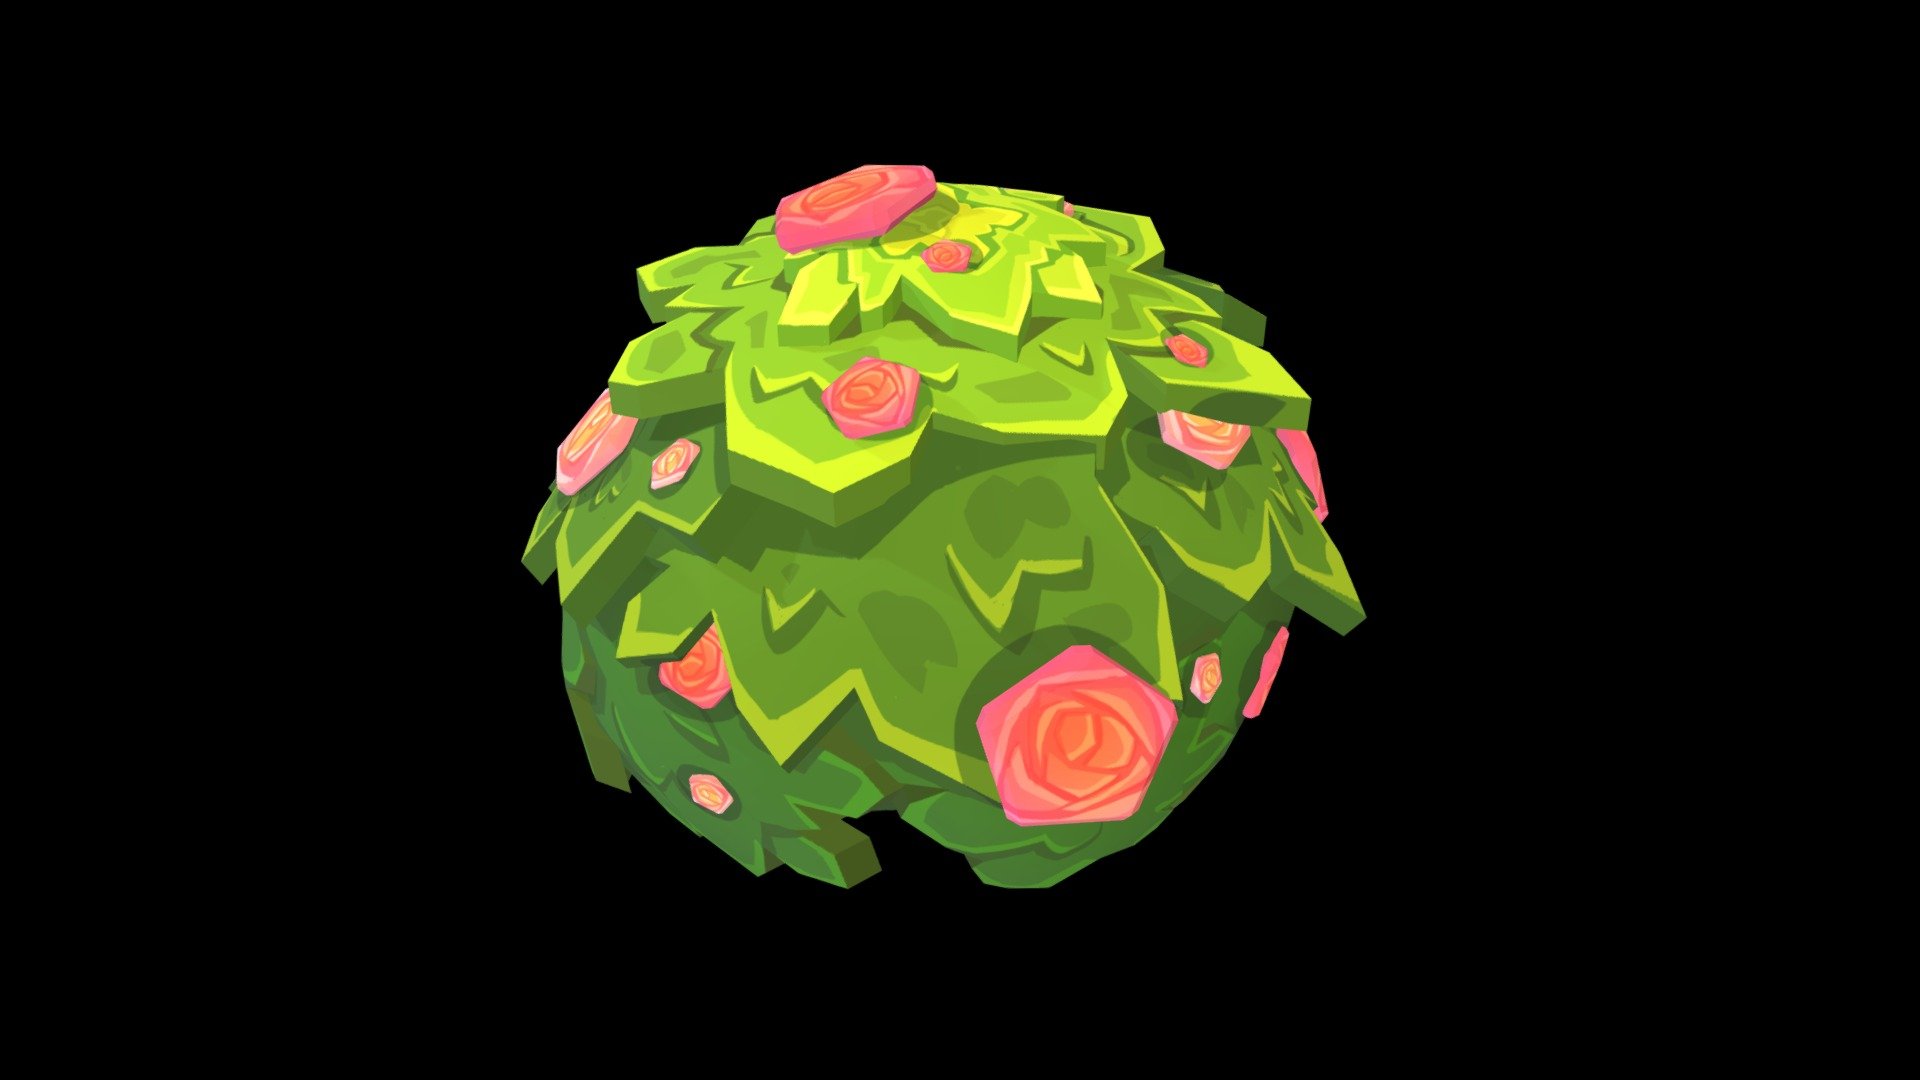 A bush in the fortnite style - Bush_fortnite style - 3D model by Sarielle 3d model